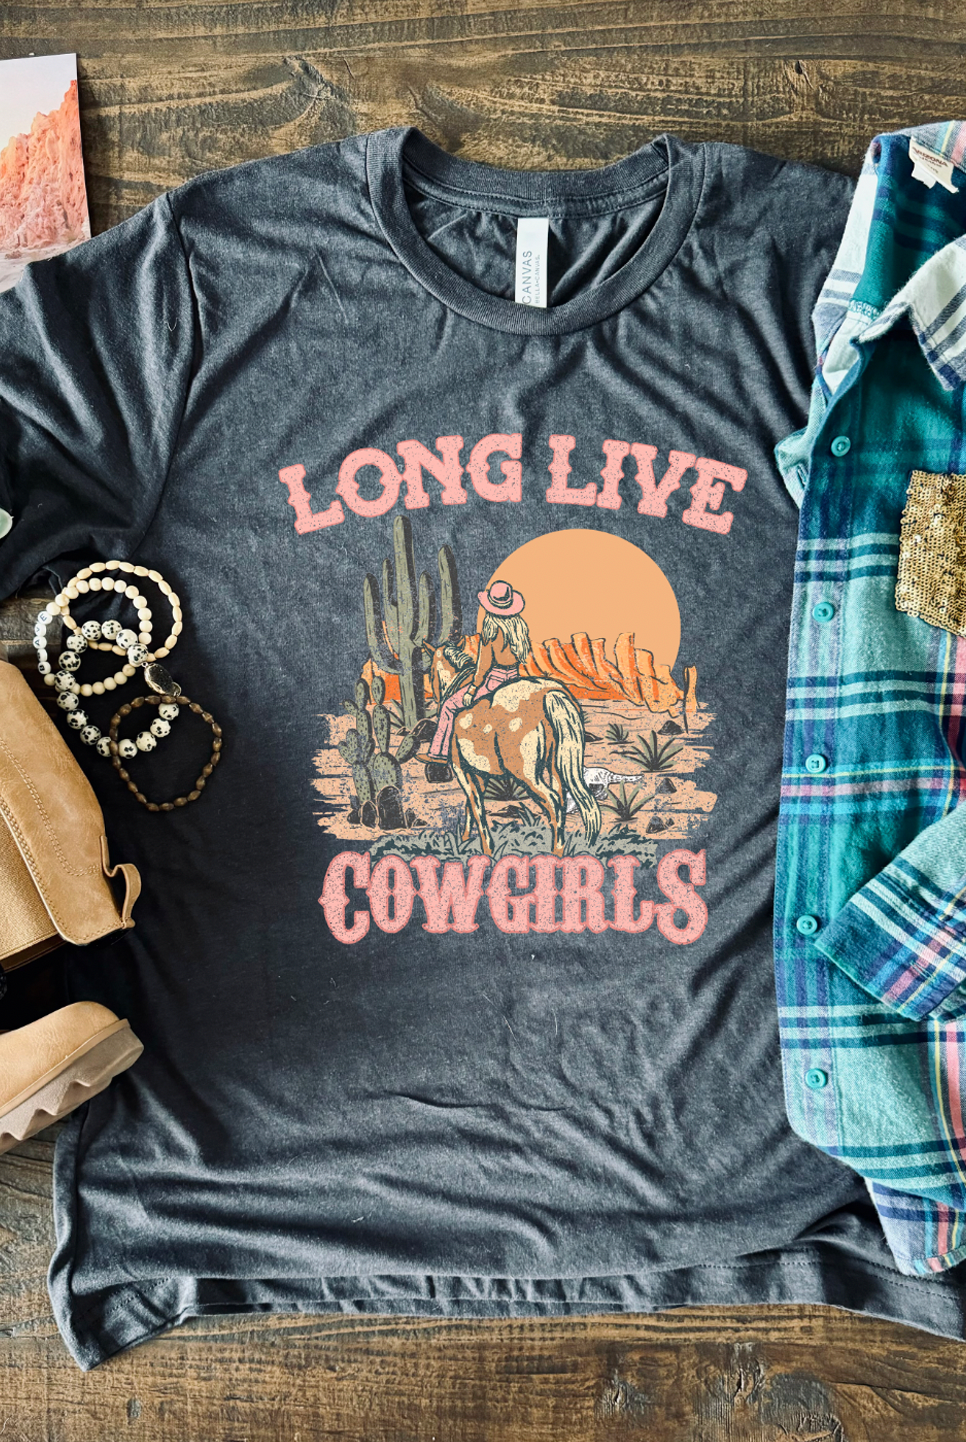 Long Live Cowgirls vintage tee on a super soft charcoal colored unisex tee shown with flannel.